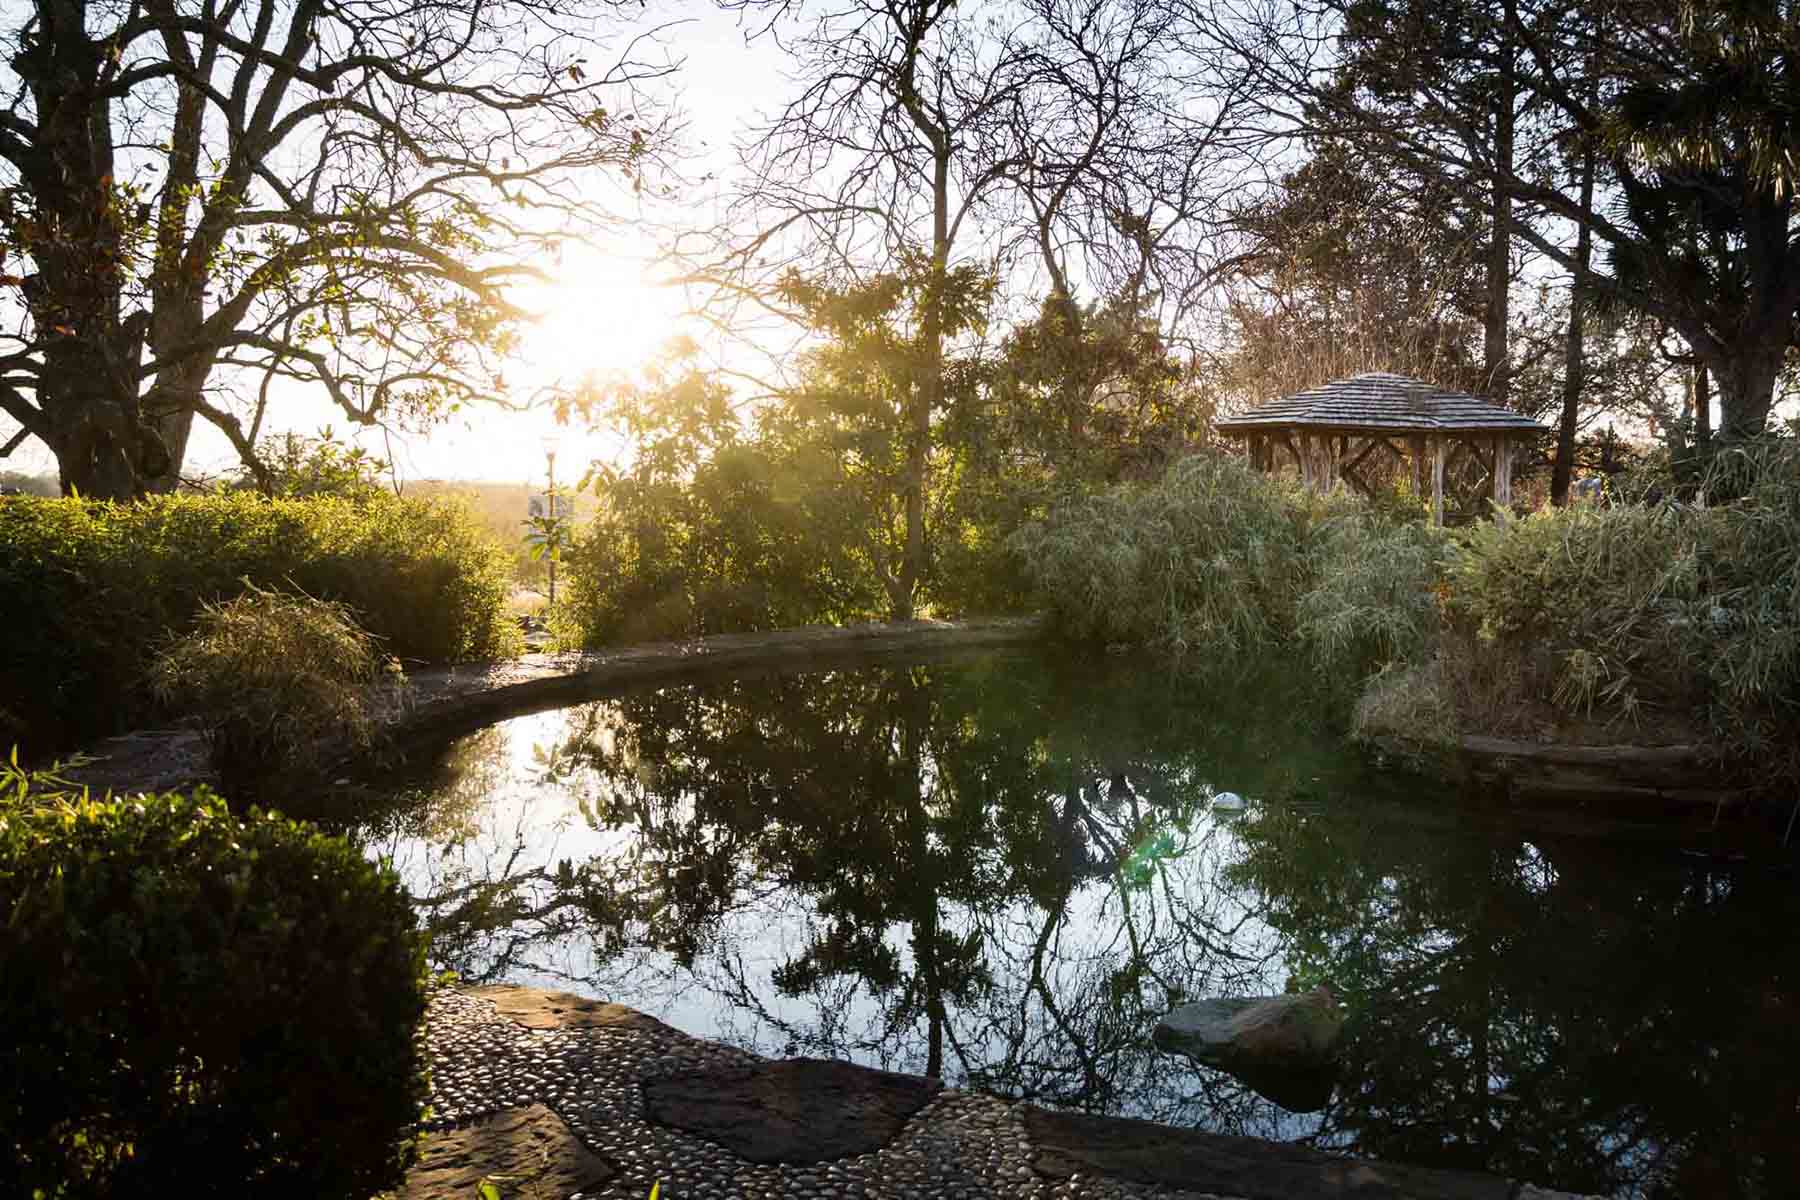 Koi pond and Asian-style gazebo for an article on how to take photos at the McNay Art Museum